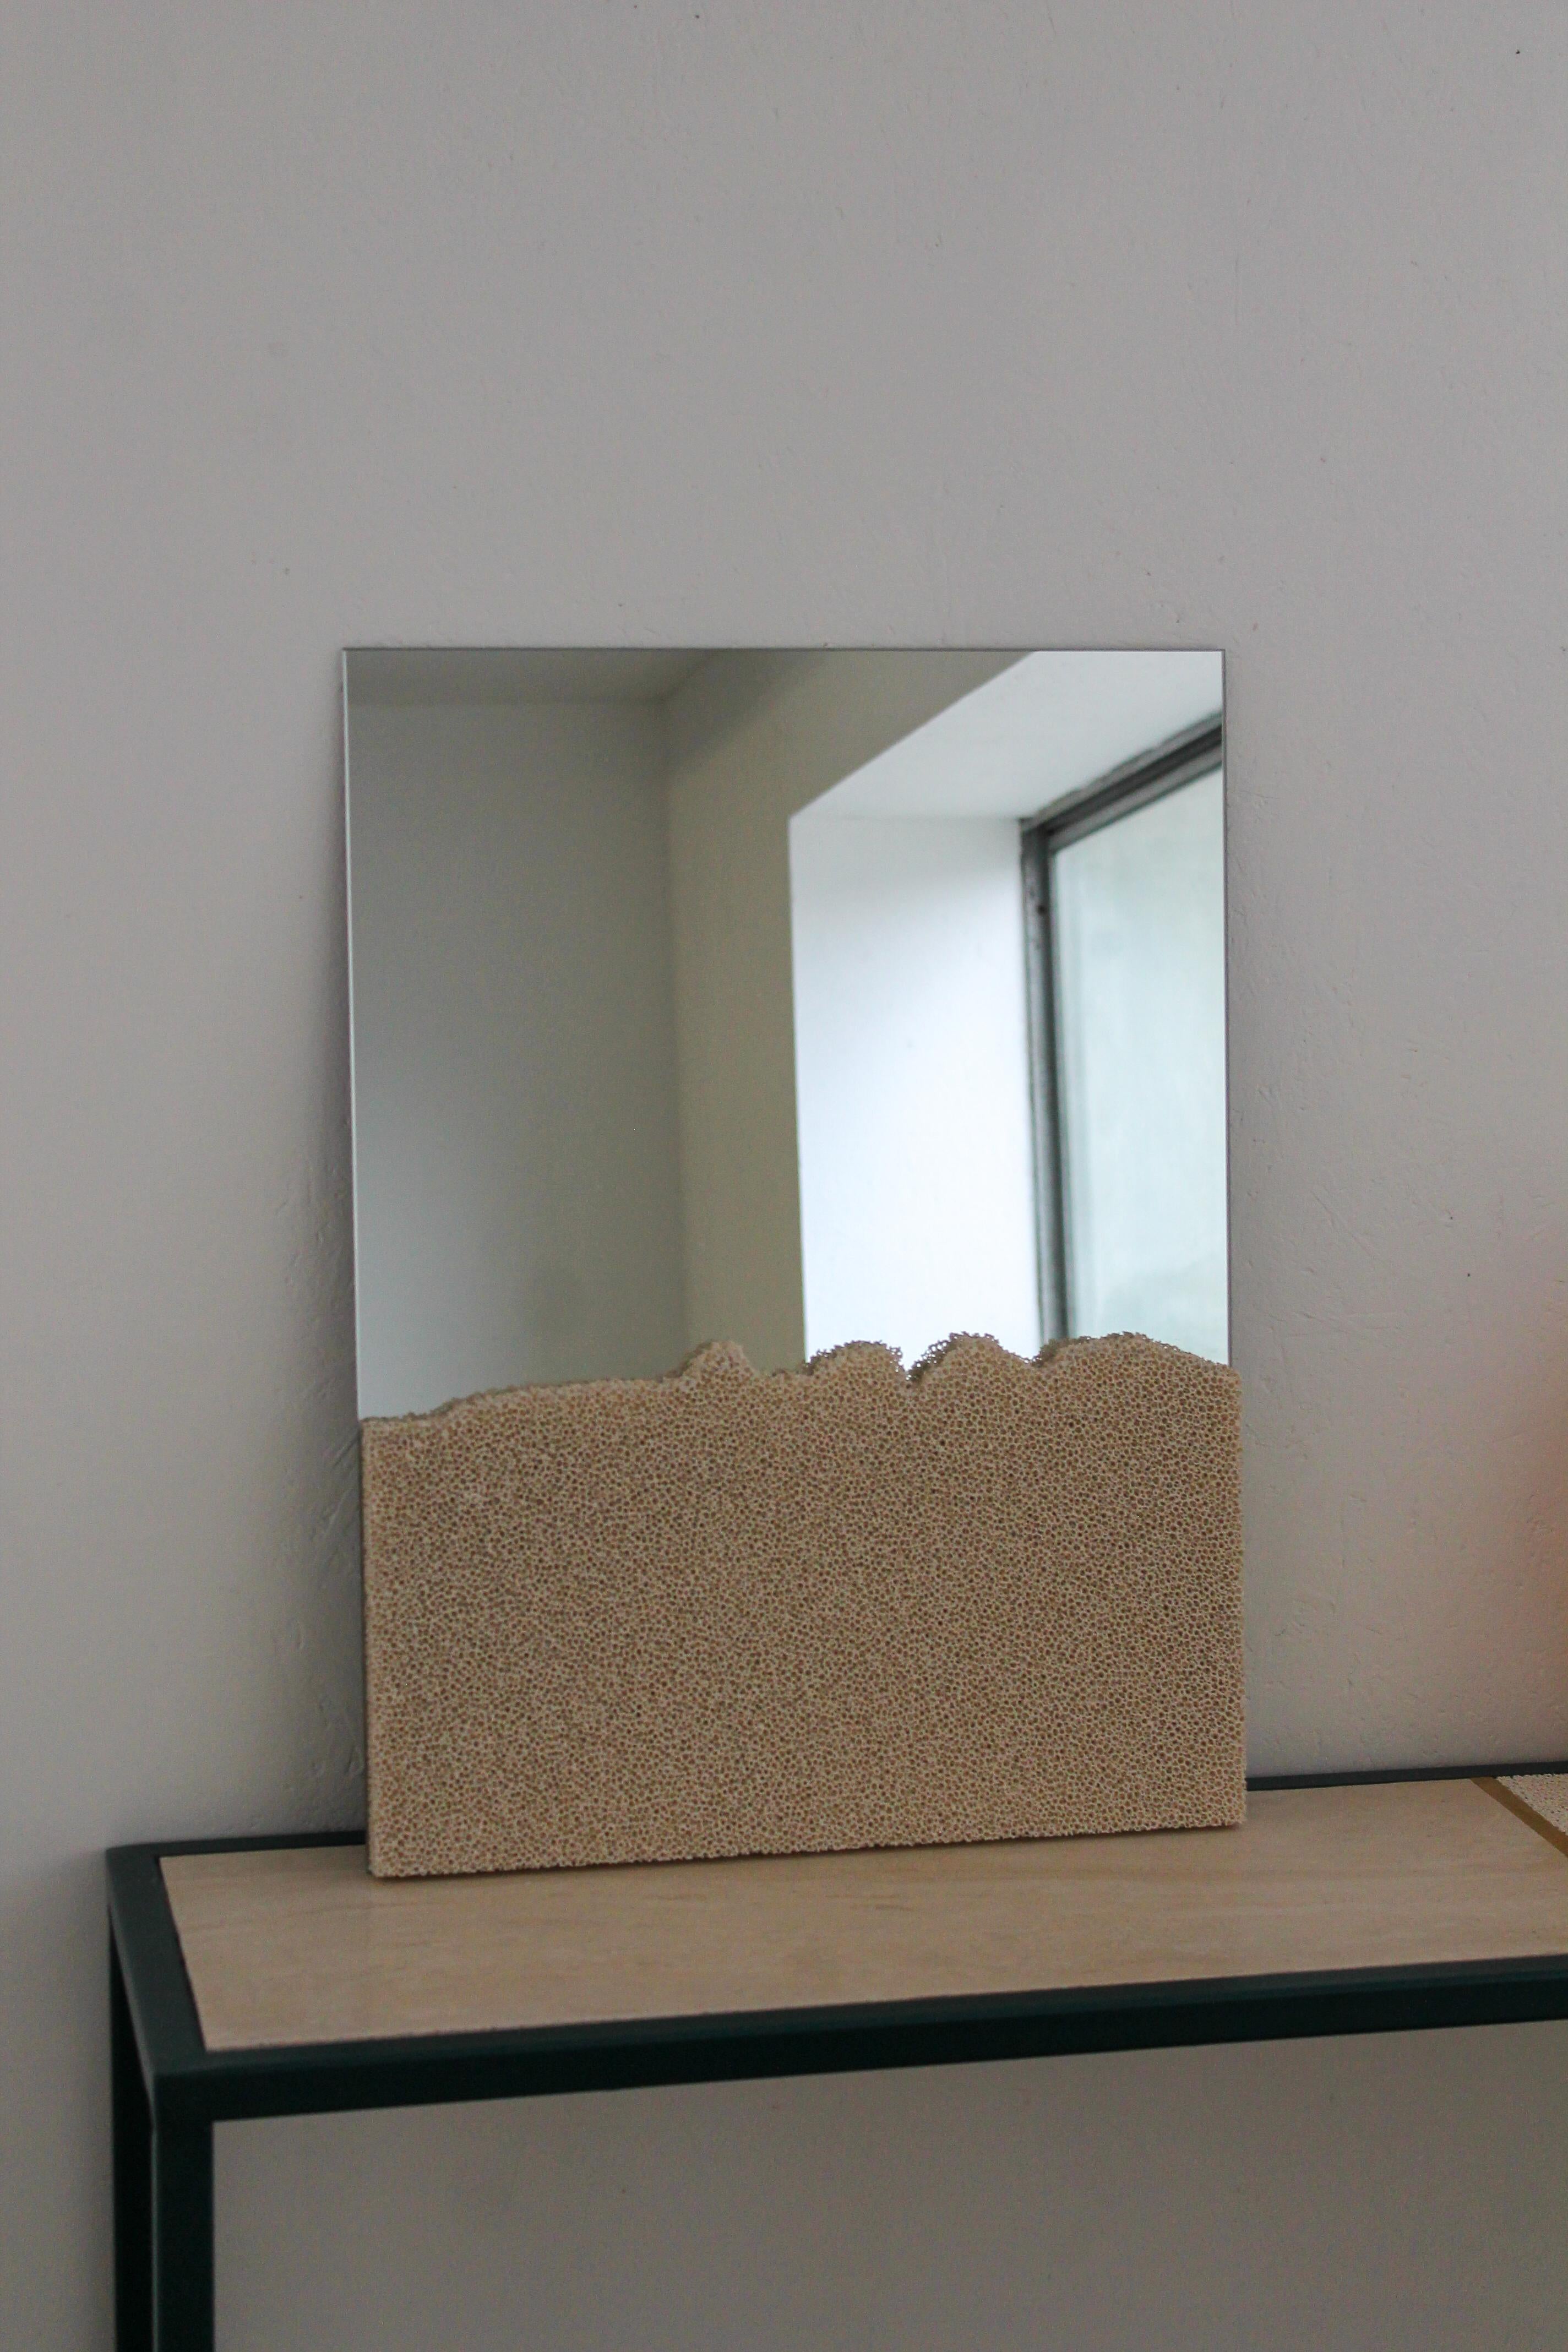 The SR Mirror is a humble Mirror that Designer Jordan Keaney has made specifically to suit both hanging or standing, featuring his signature Ceramic Foam on the front, transforming these mirrors into functional sculptures. The porous ceramic